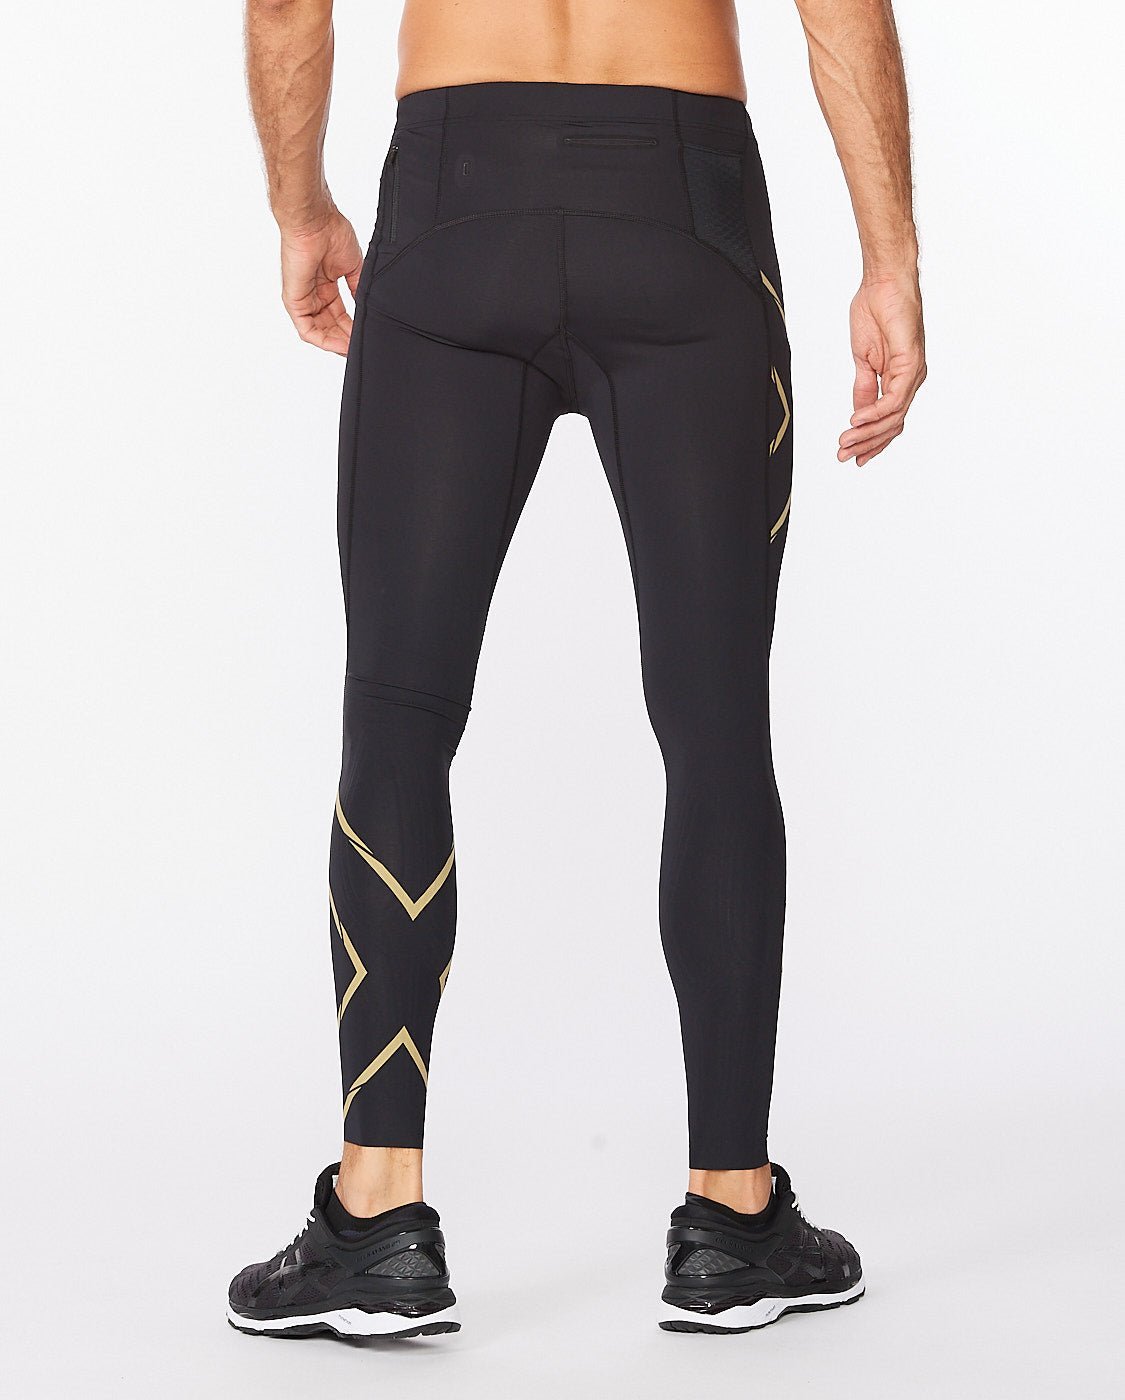 2XU South Africa - Men's Light Speed Compression Tights - Black/Gold Reflective